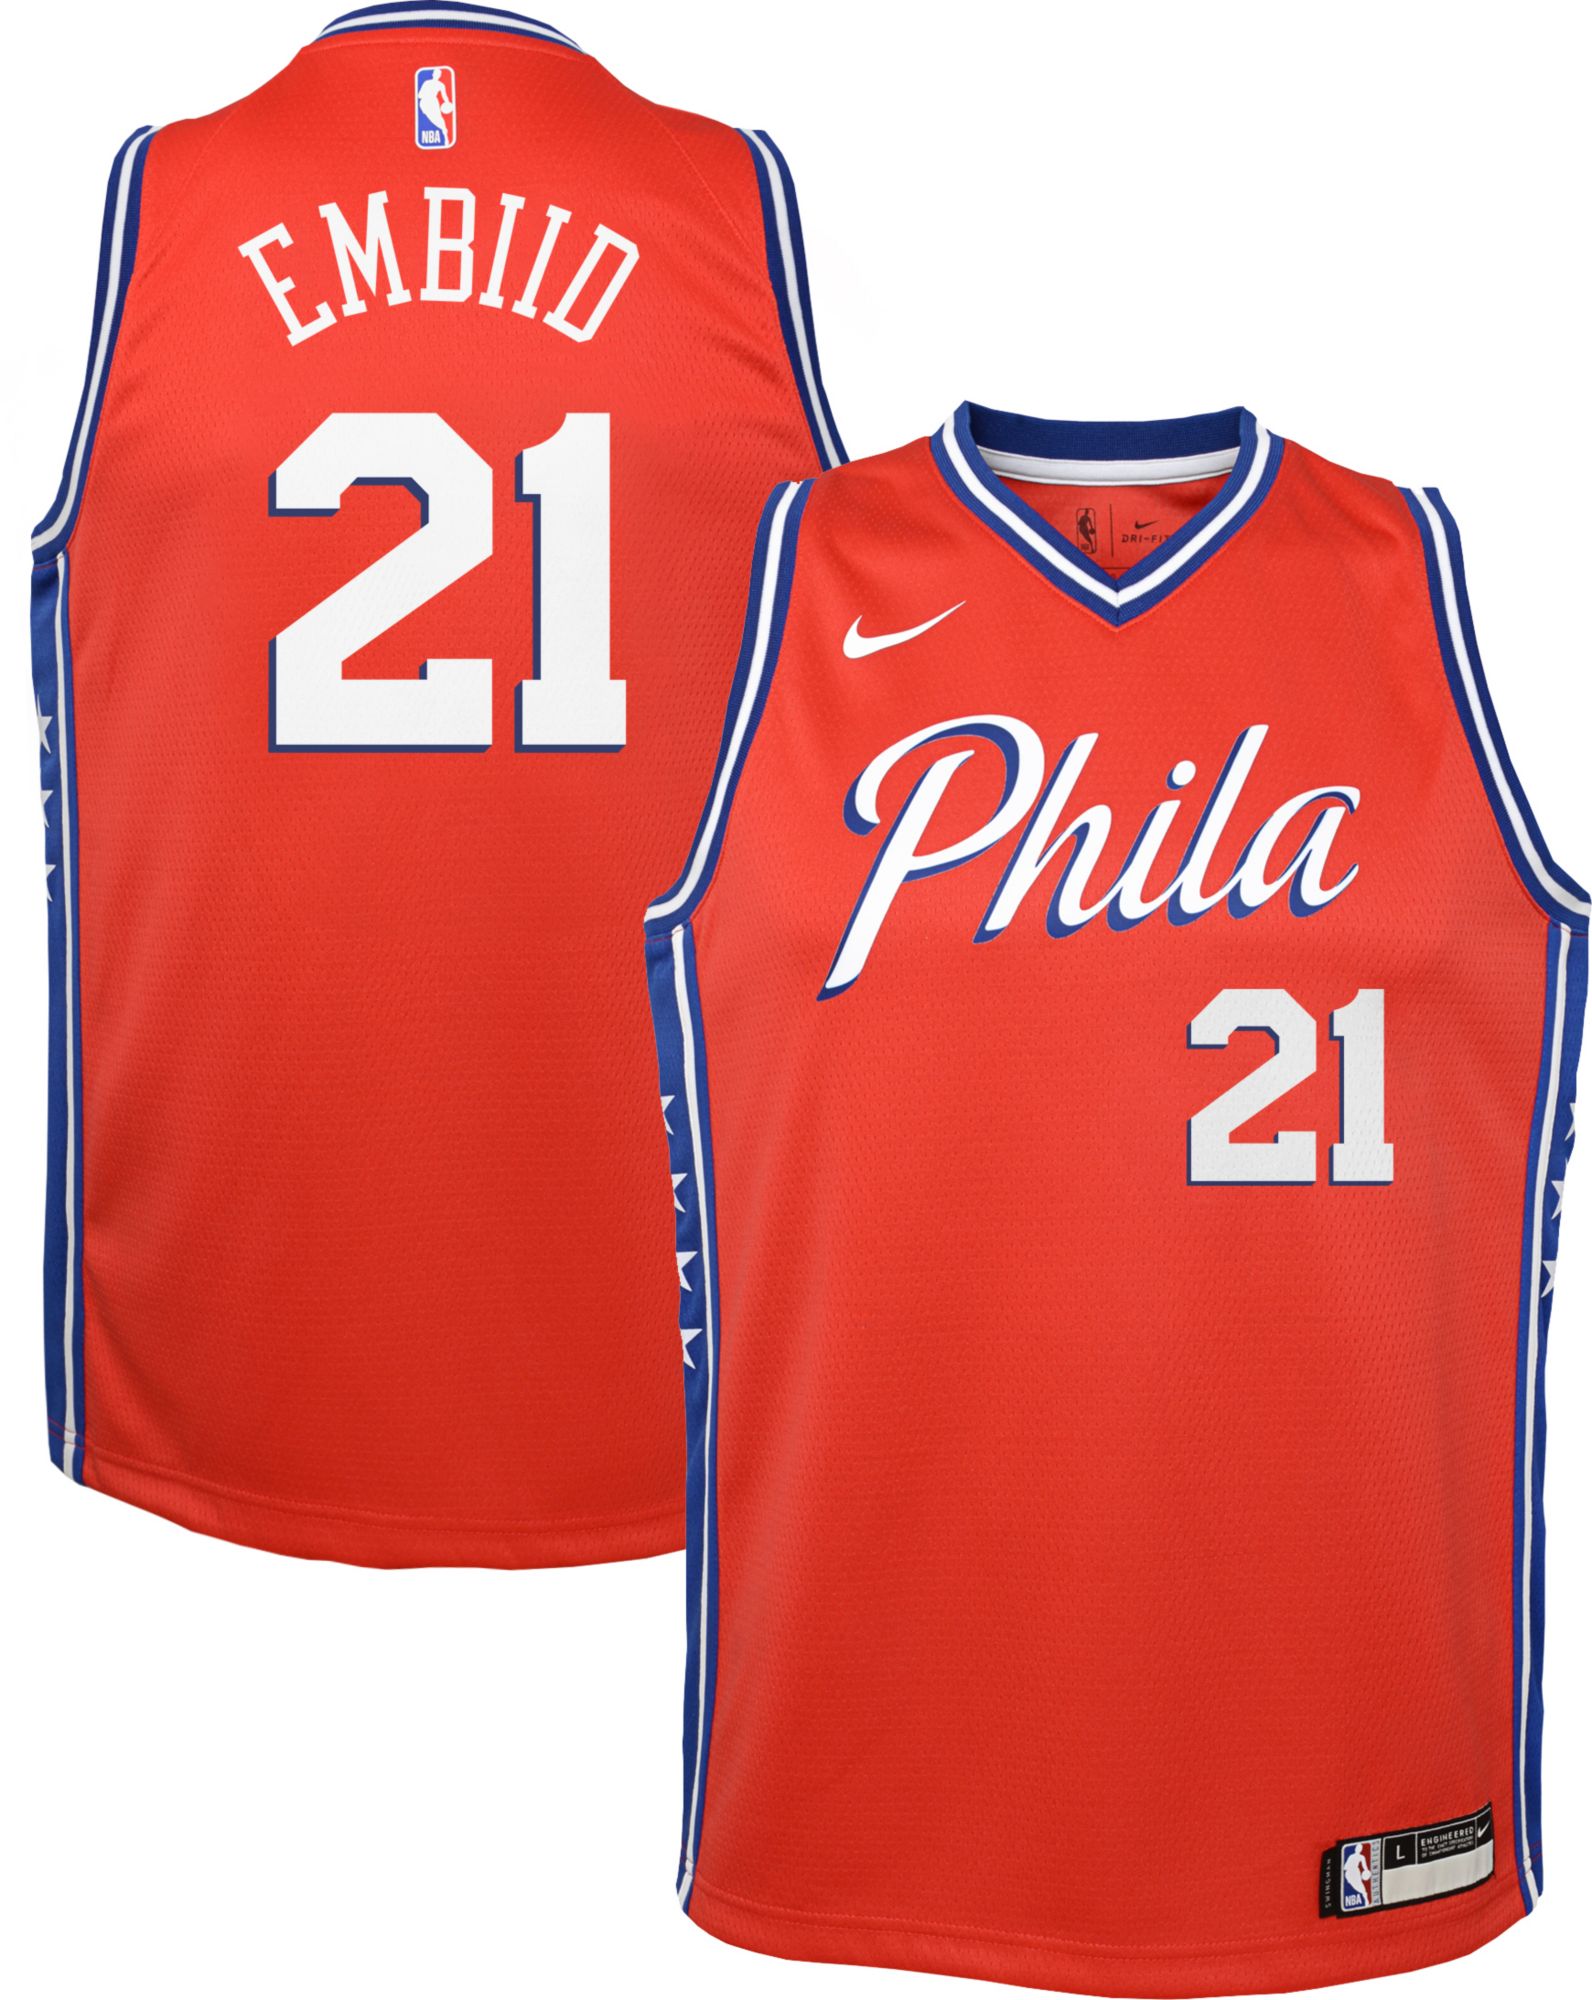 76ers youth jersey